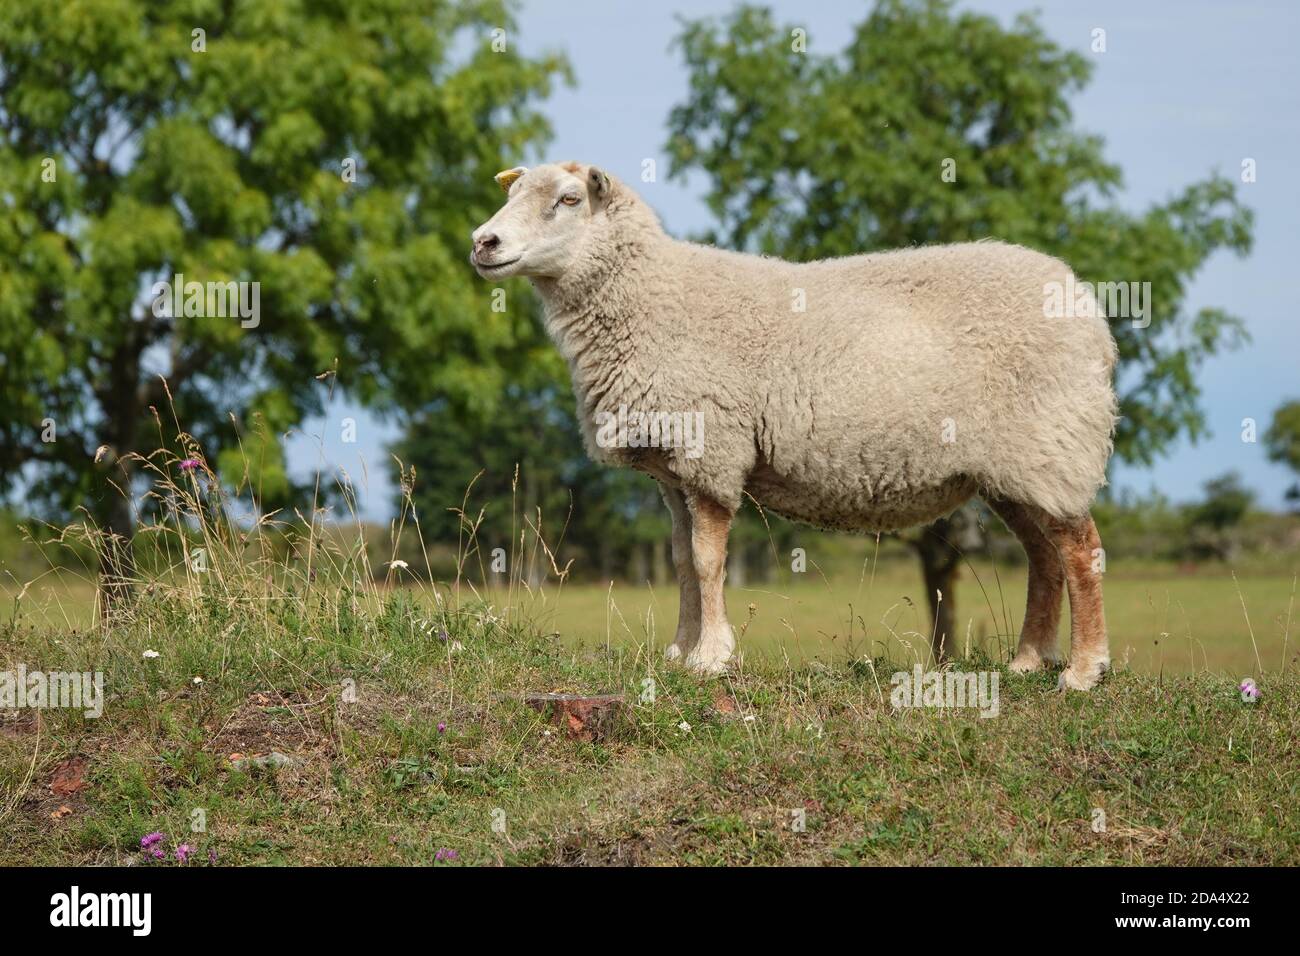 Wild animals - sheep portrait. Farmland View of a Woolly Sheep in a Green forest Field Stock Photo